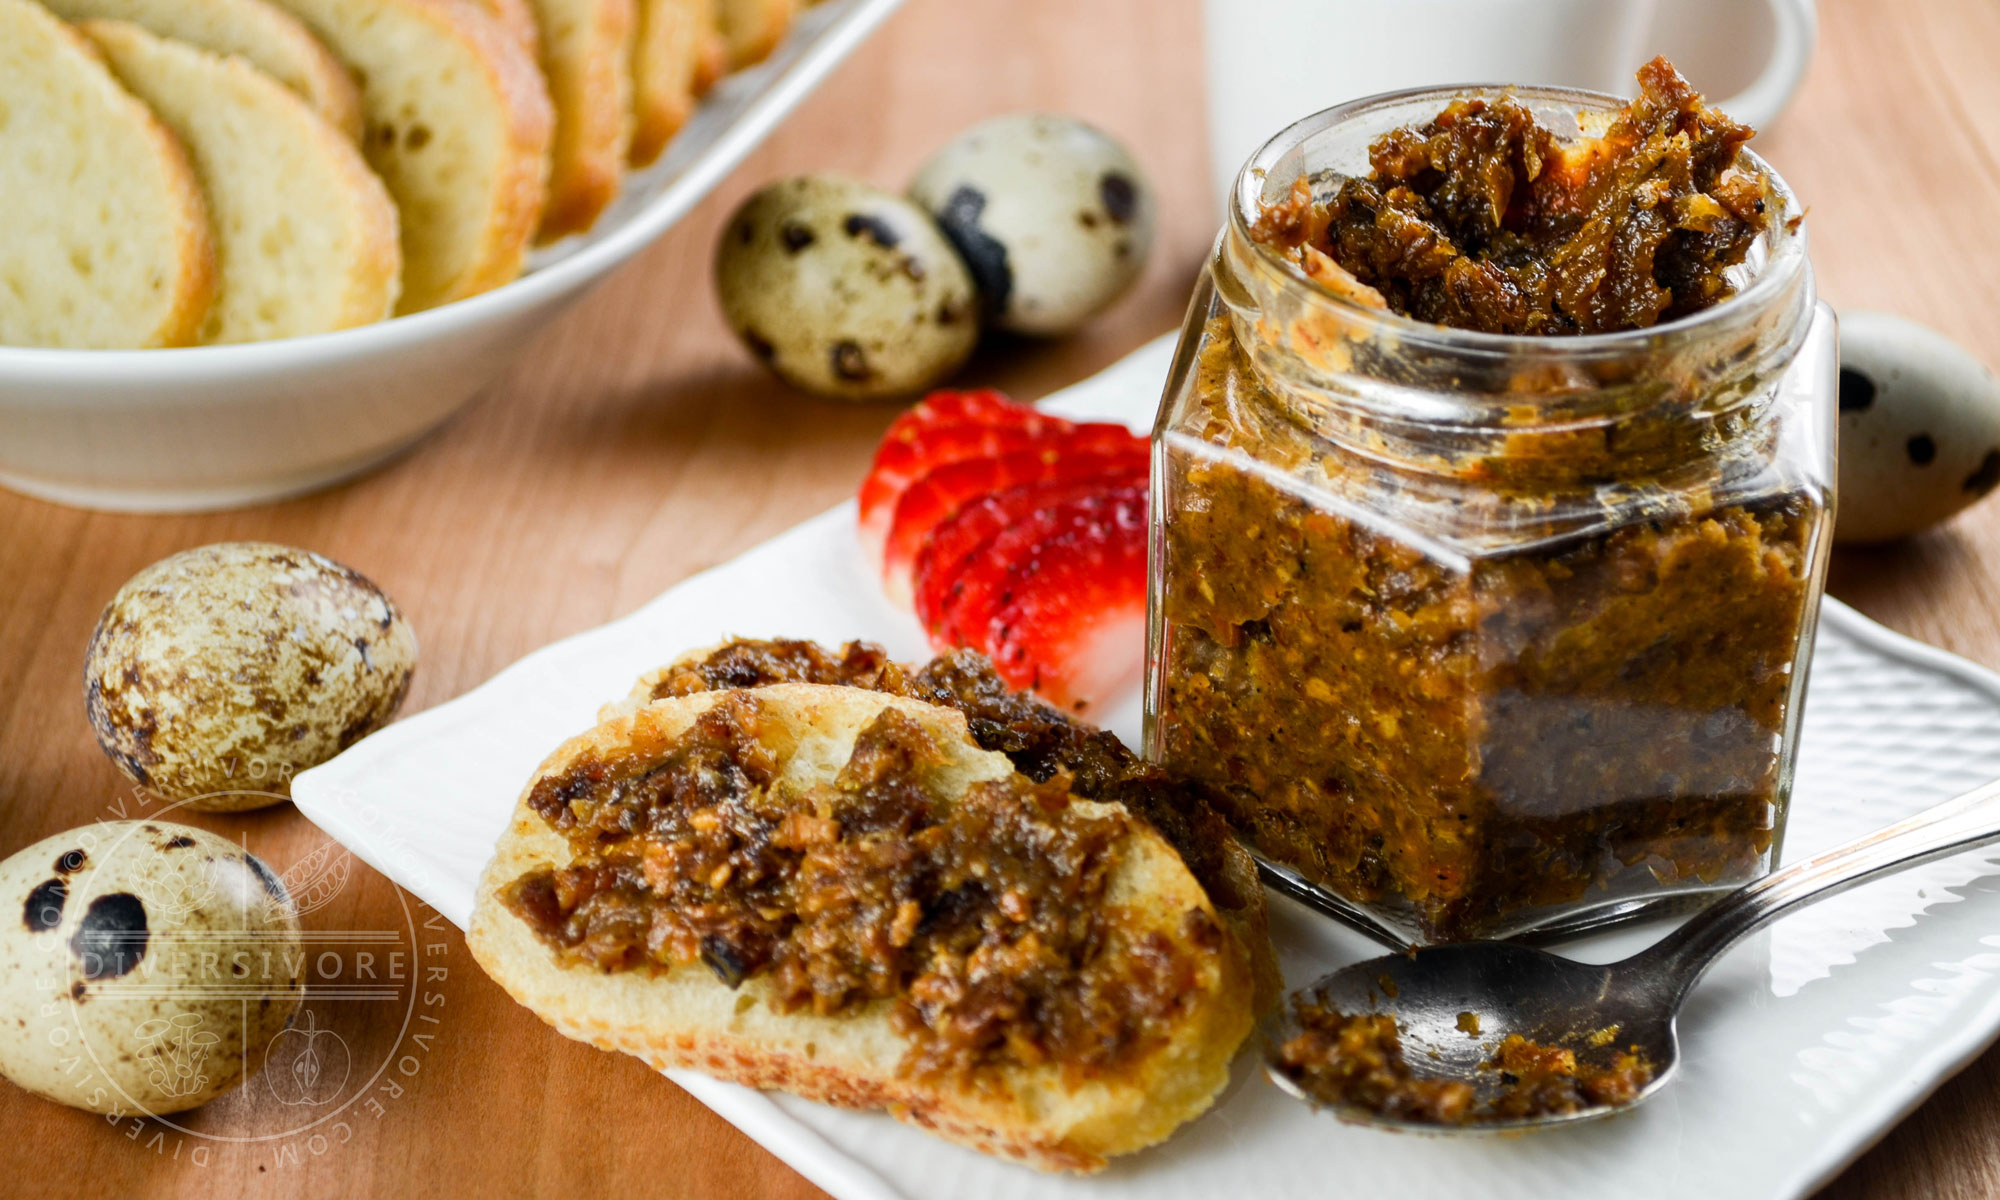 Featured image for “Bacon Marmalade”